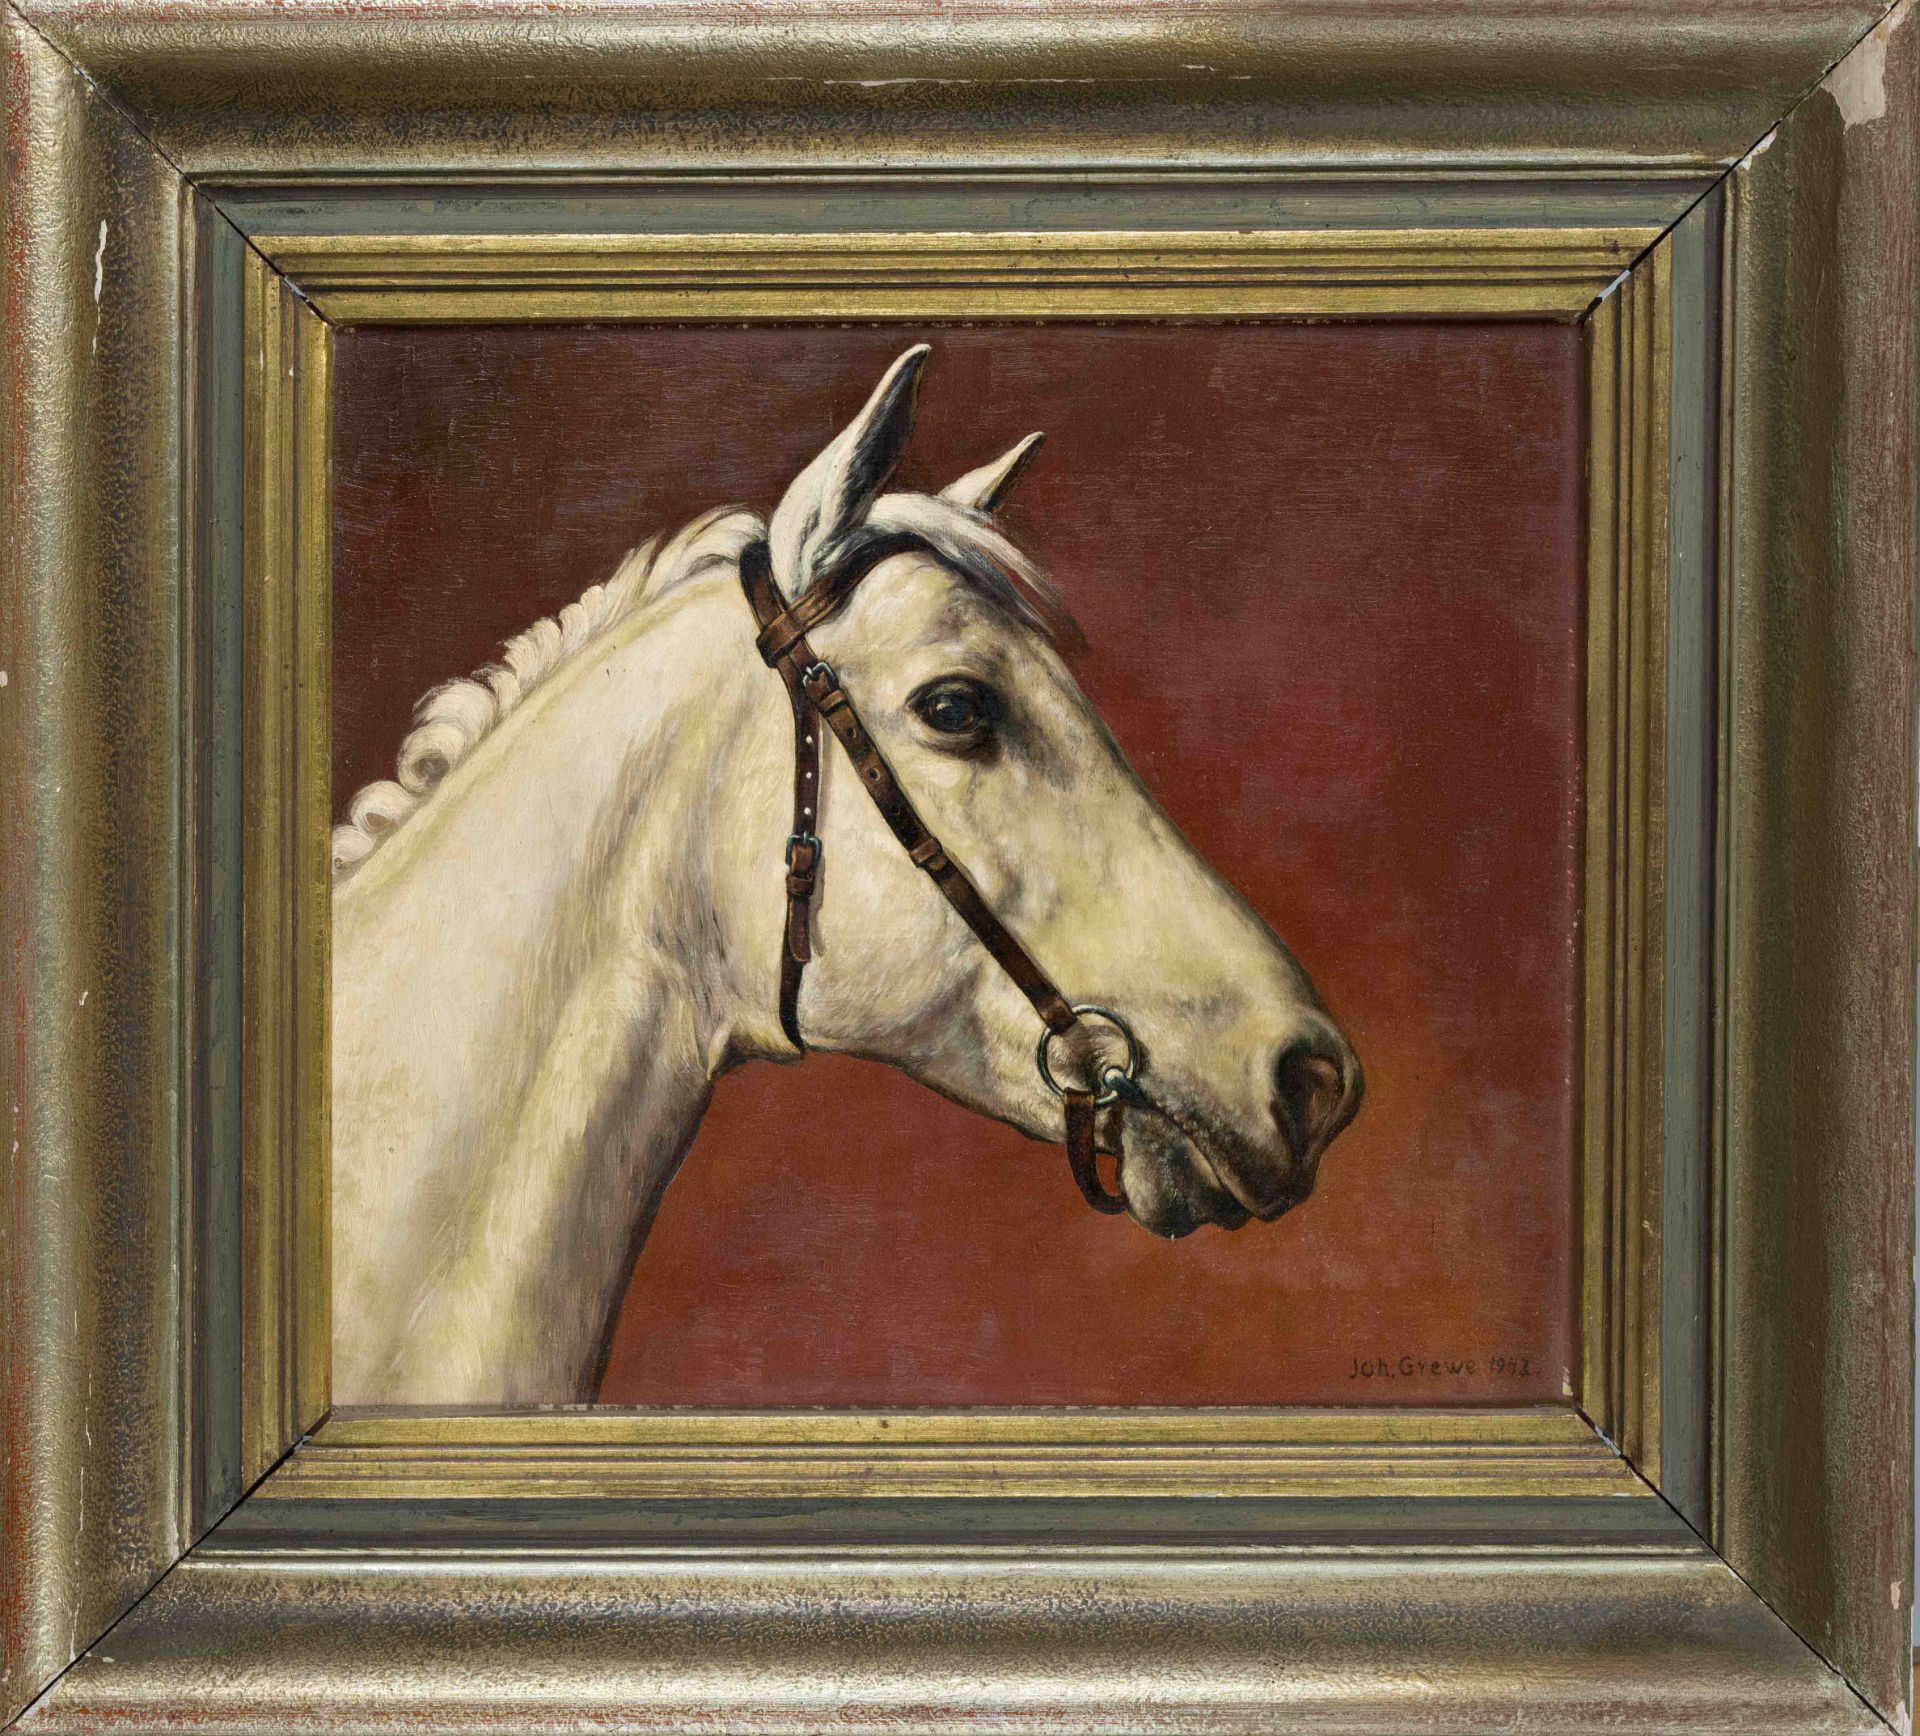 Joh. Grewe, German painter 1st half of the 20th century, portrait of a horse, oil on wood, signed